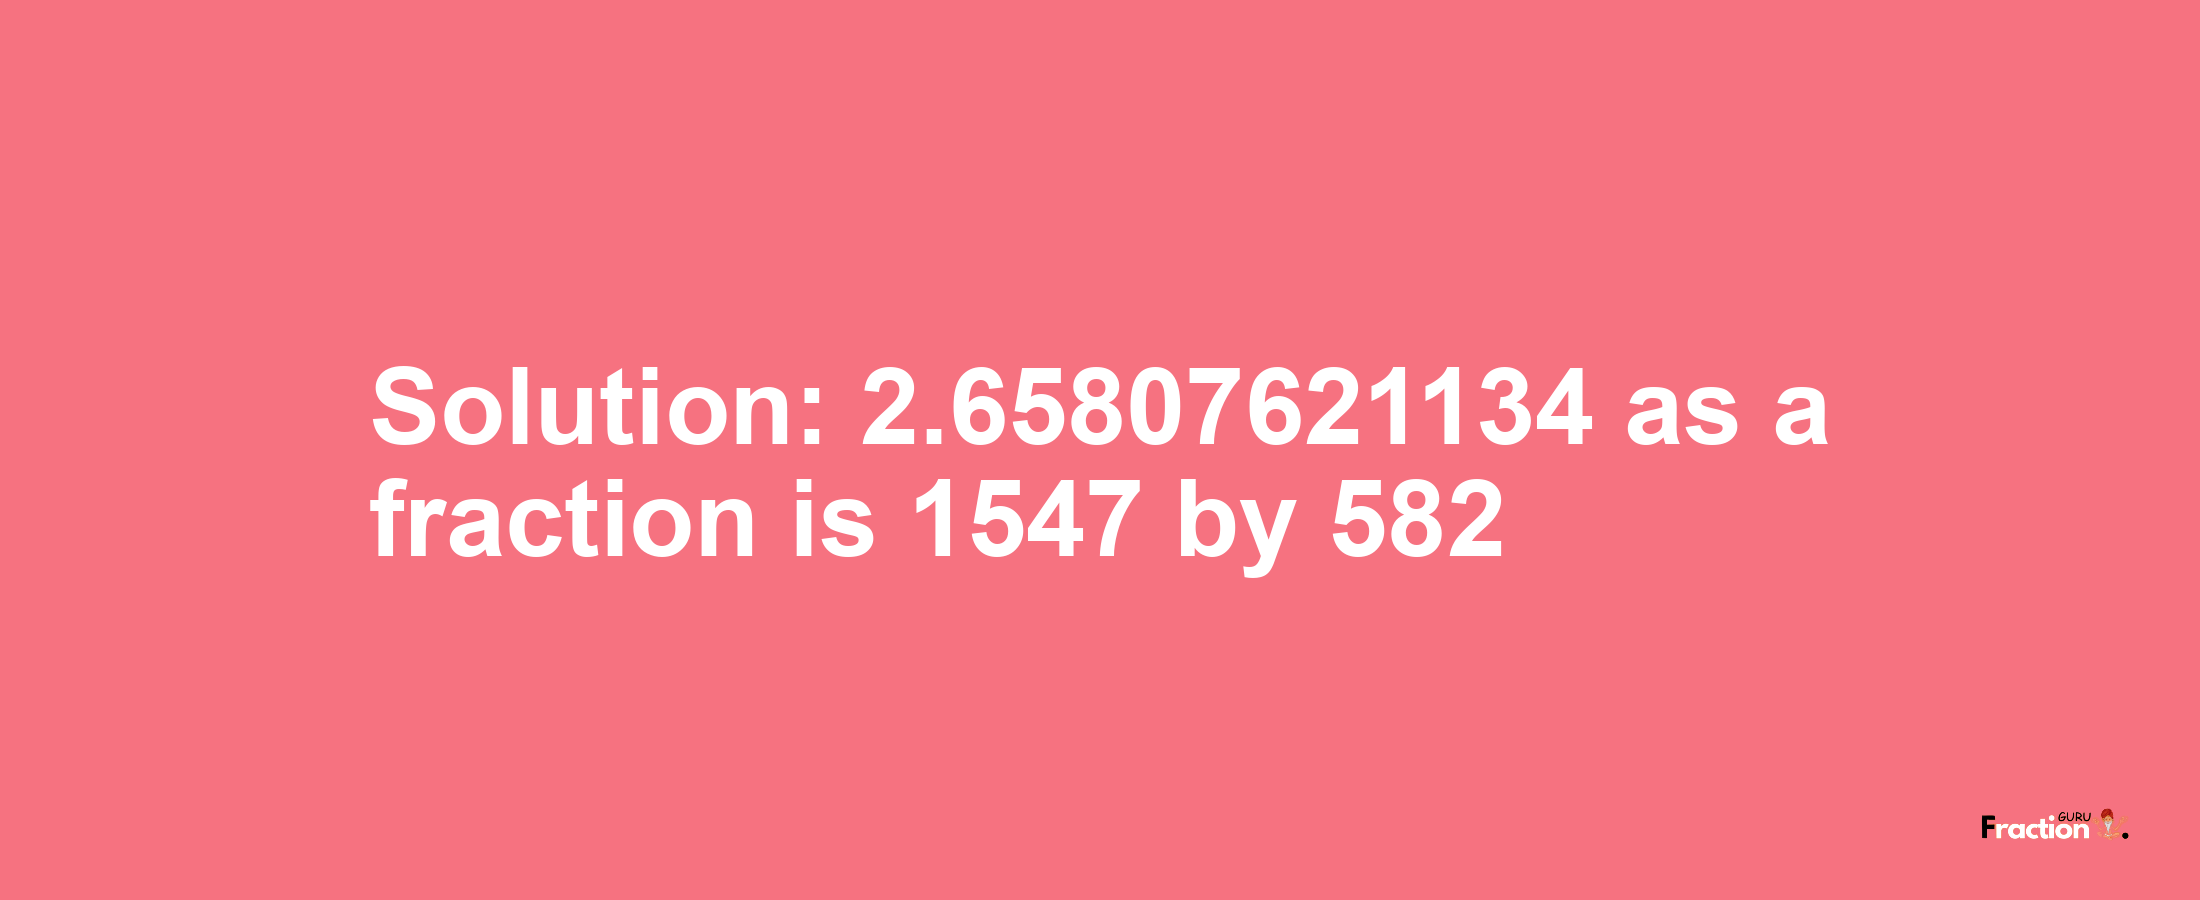 Solution:2.65807621134 as a fraction is 1547/582